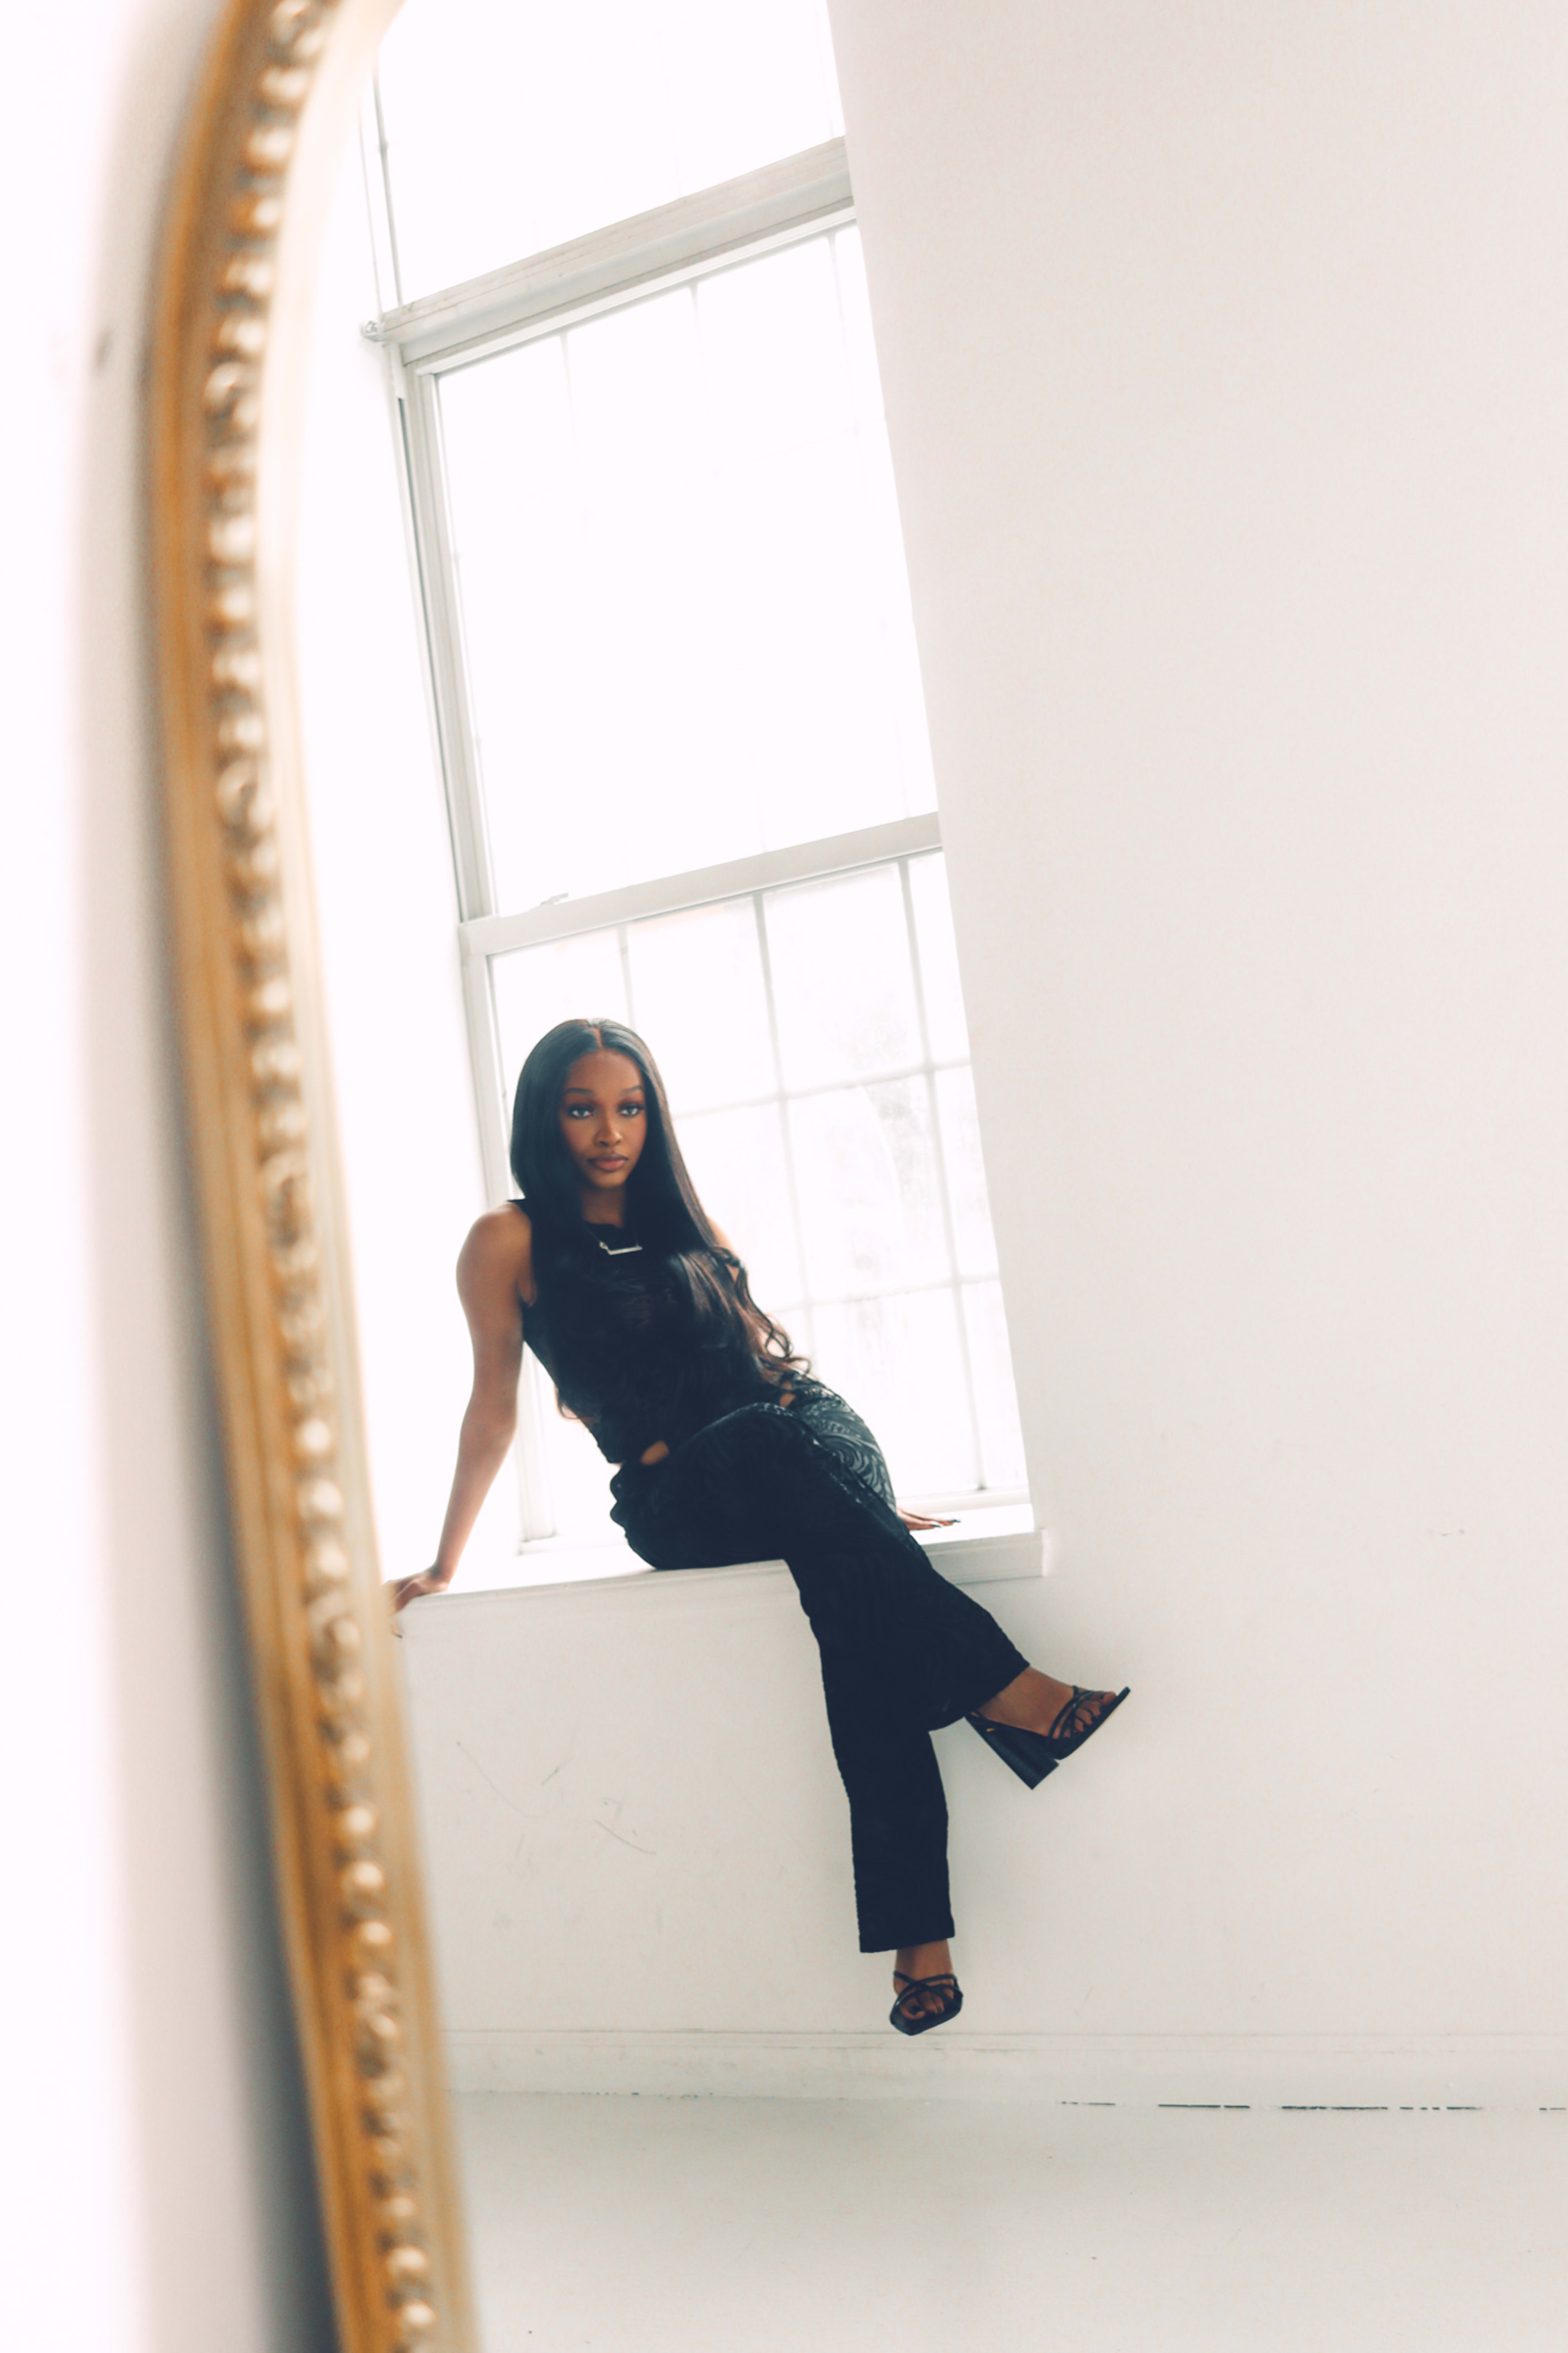 A minimalist photoshoot of a woman sitting on a black ledge in front of a white mirror.